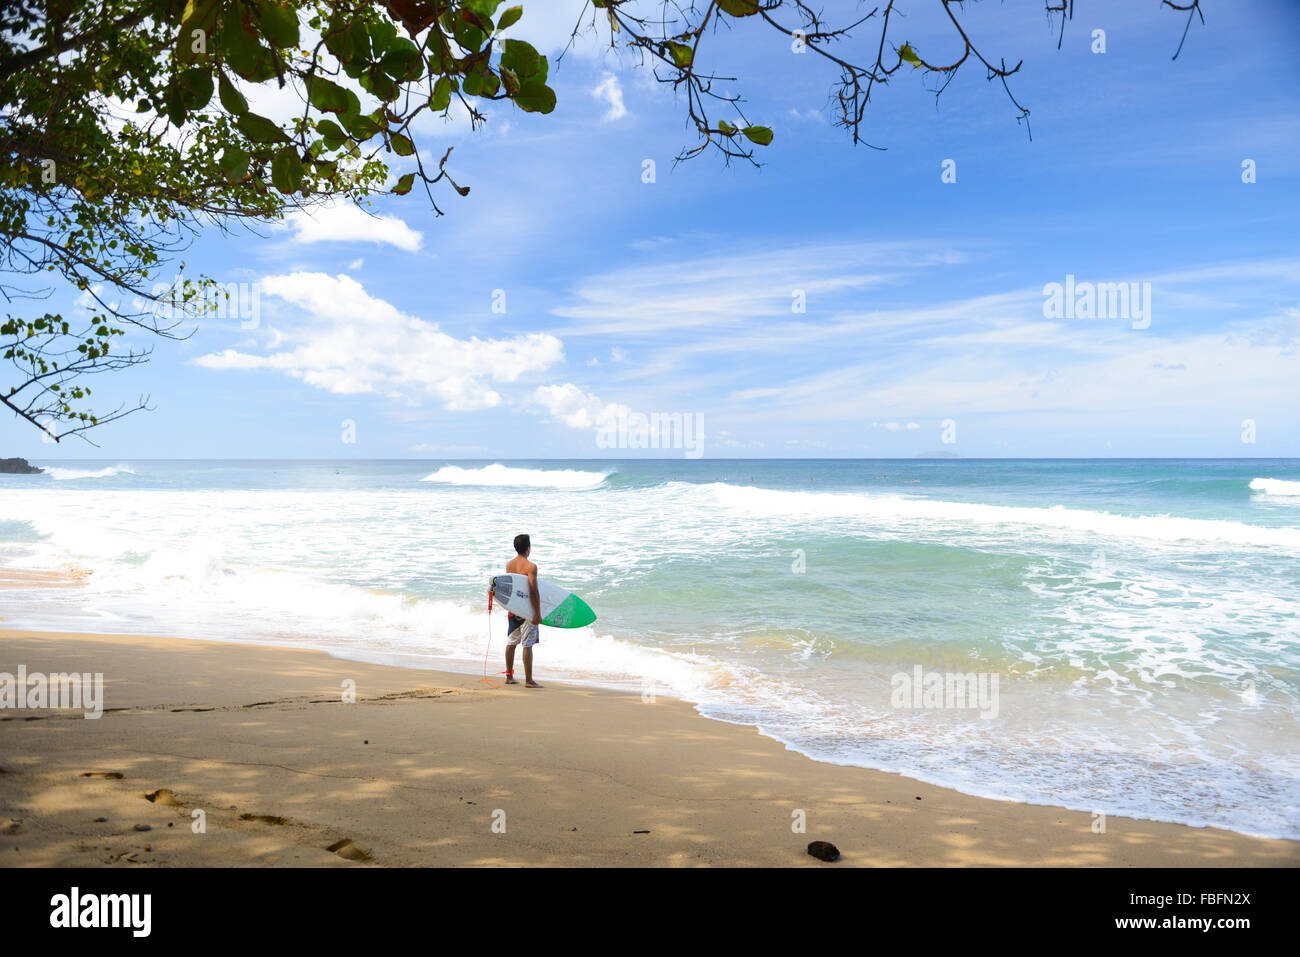 Surfer contemplating the water at Dome's Beach. Rincon, Puerto Rico. USA territory. Caribbean Island. Stock Photo